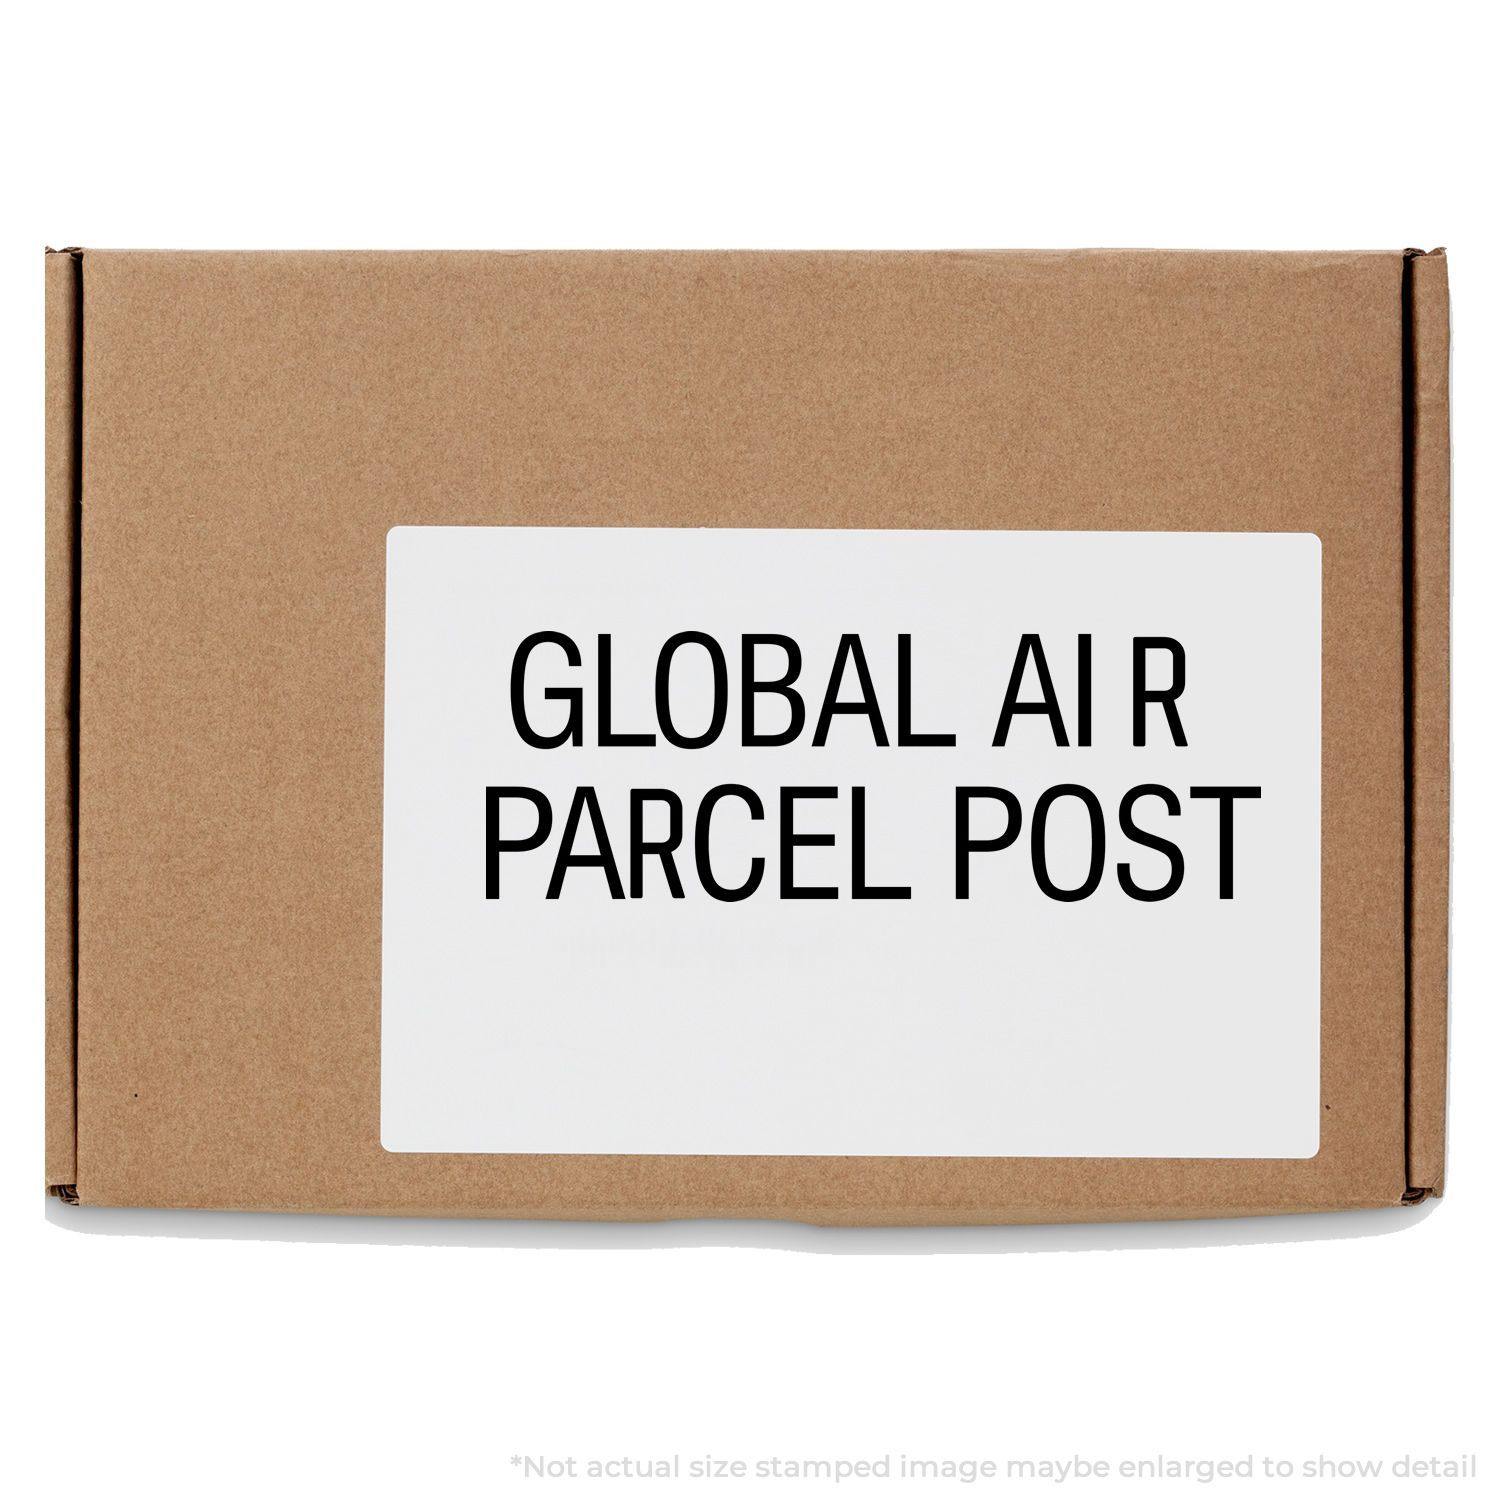 In Use Large Pre-Inked Global Air Parcel Post Stamp Image